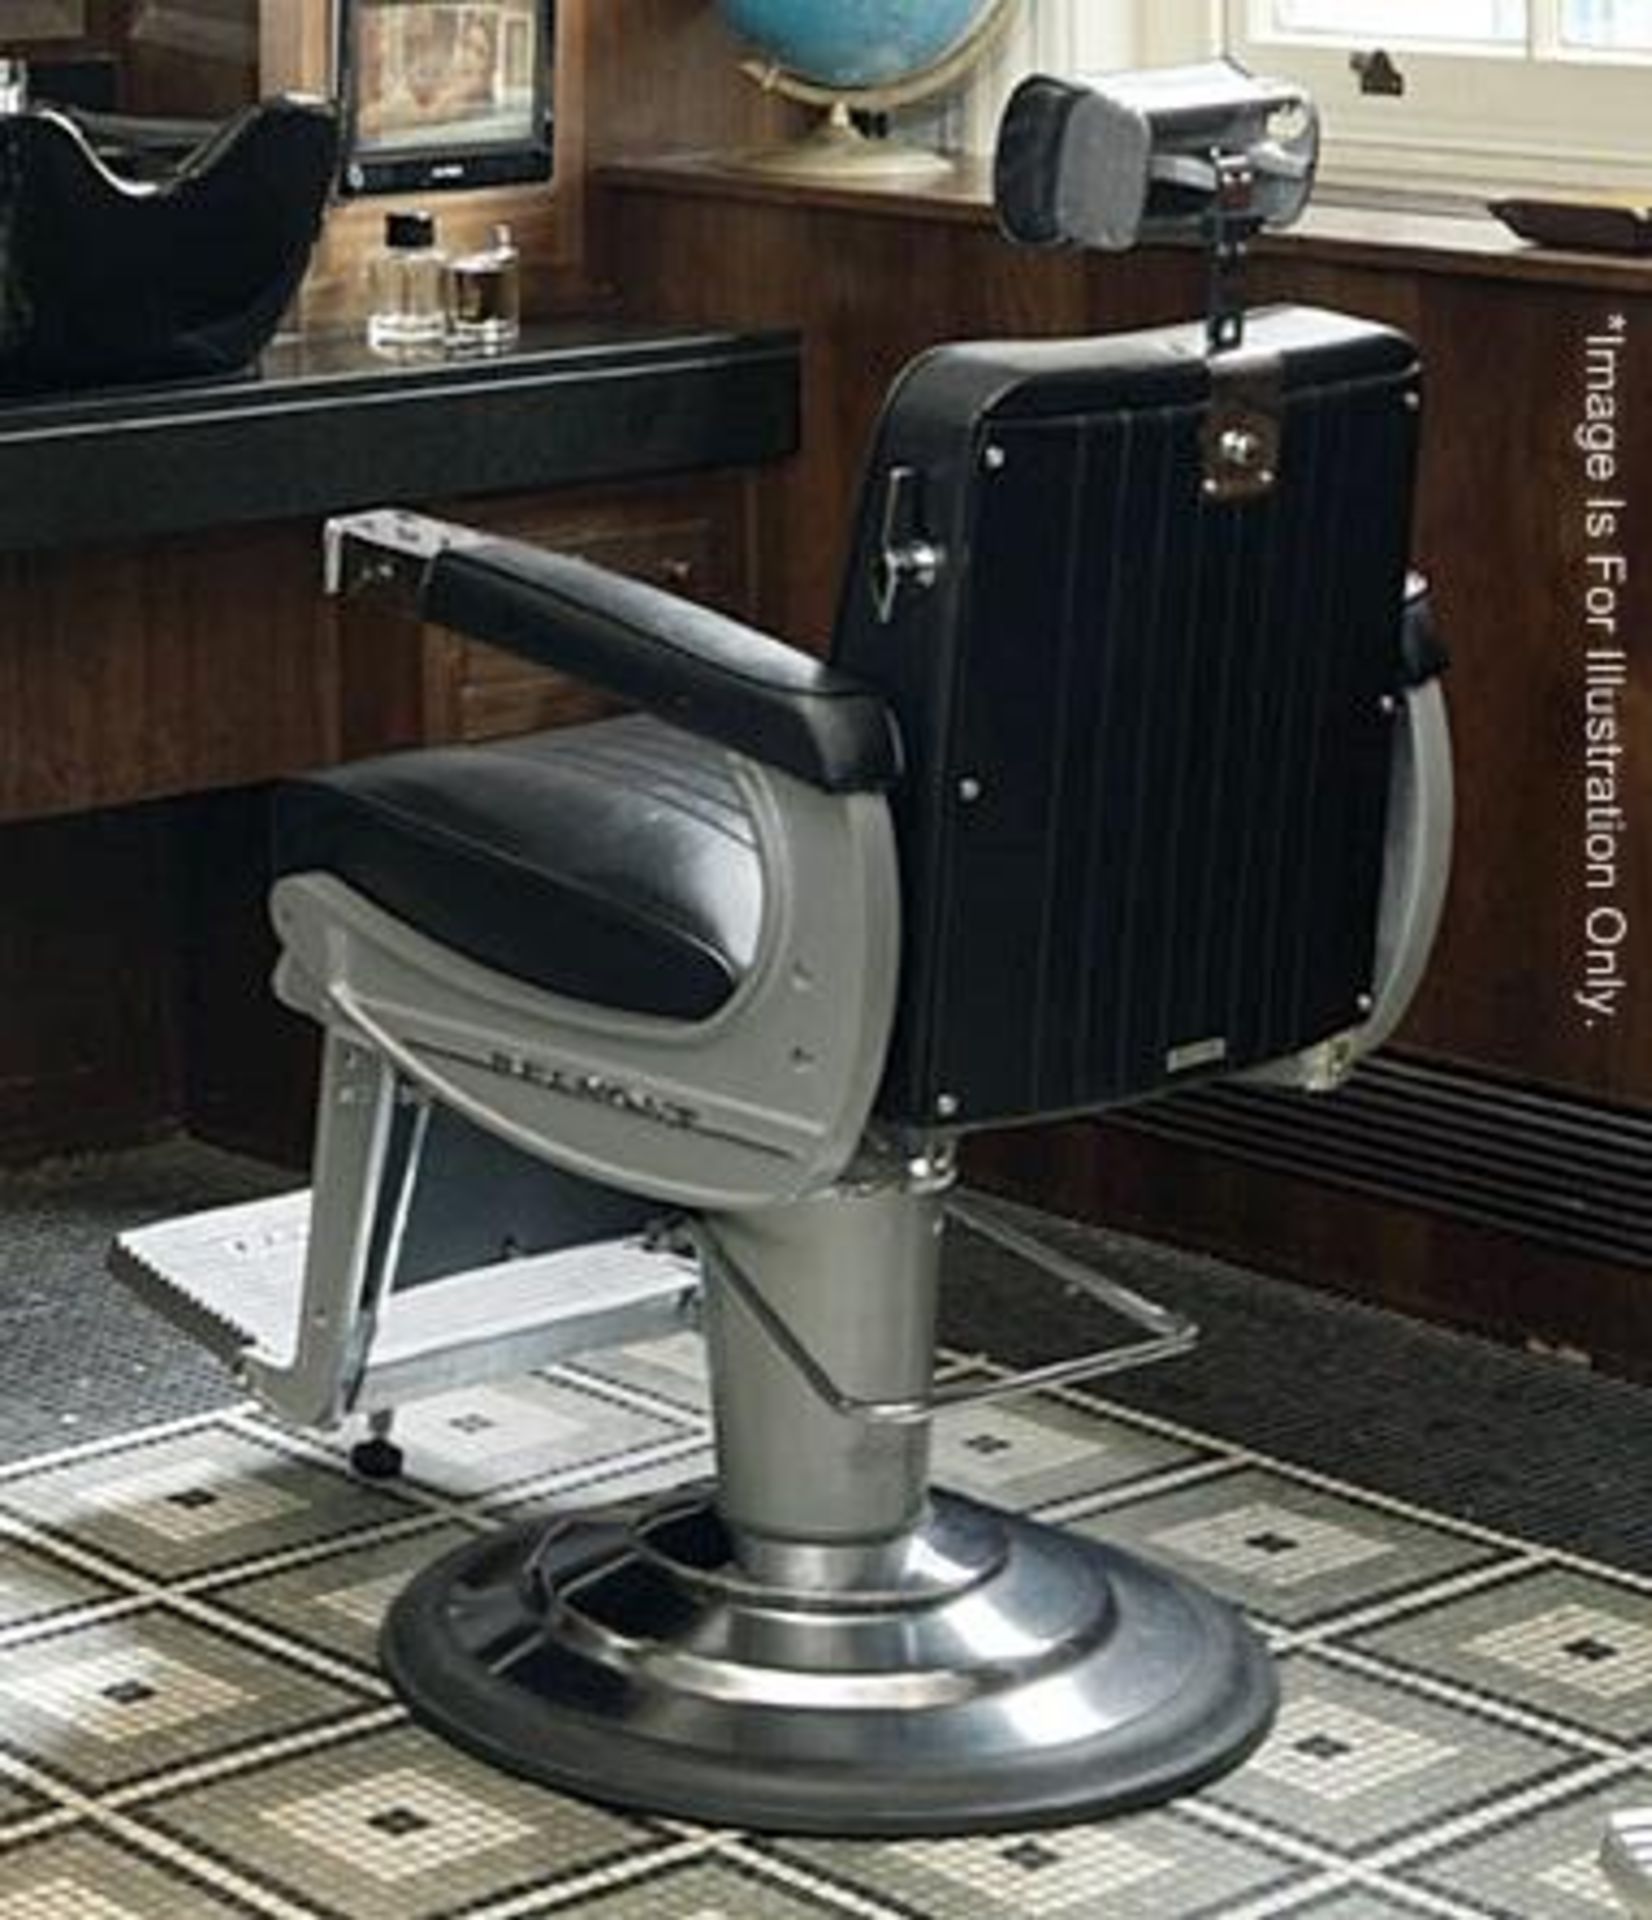 1 x Takara BELMONT "Apollo 2" Barbers Chair - Recently Taken From A Premier West-End Male Grooming S - Image 18 of 19